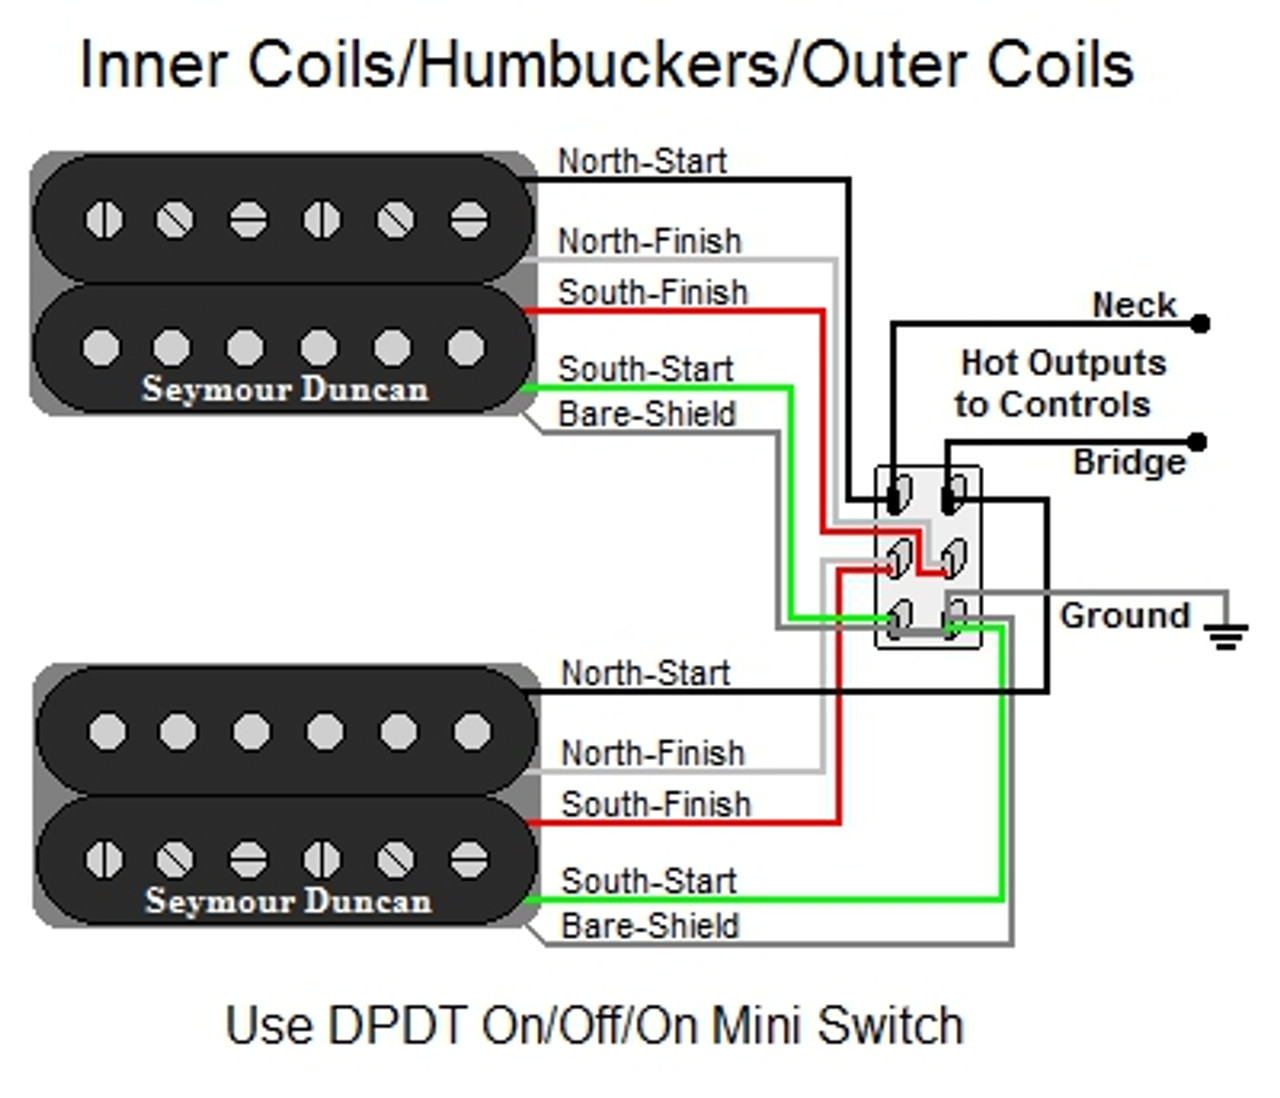 Inner Coils/Humbuckers/Outer Coils